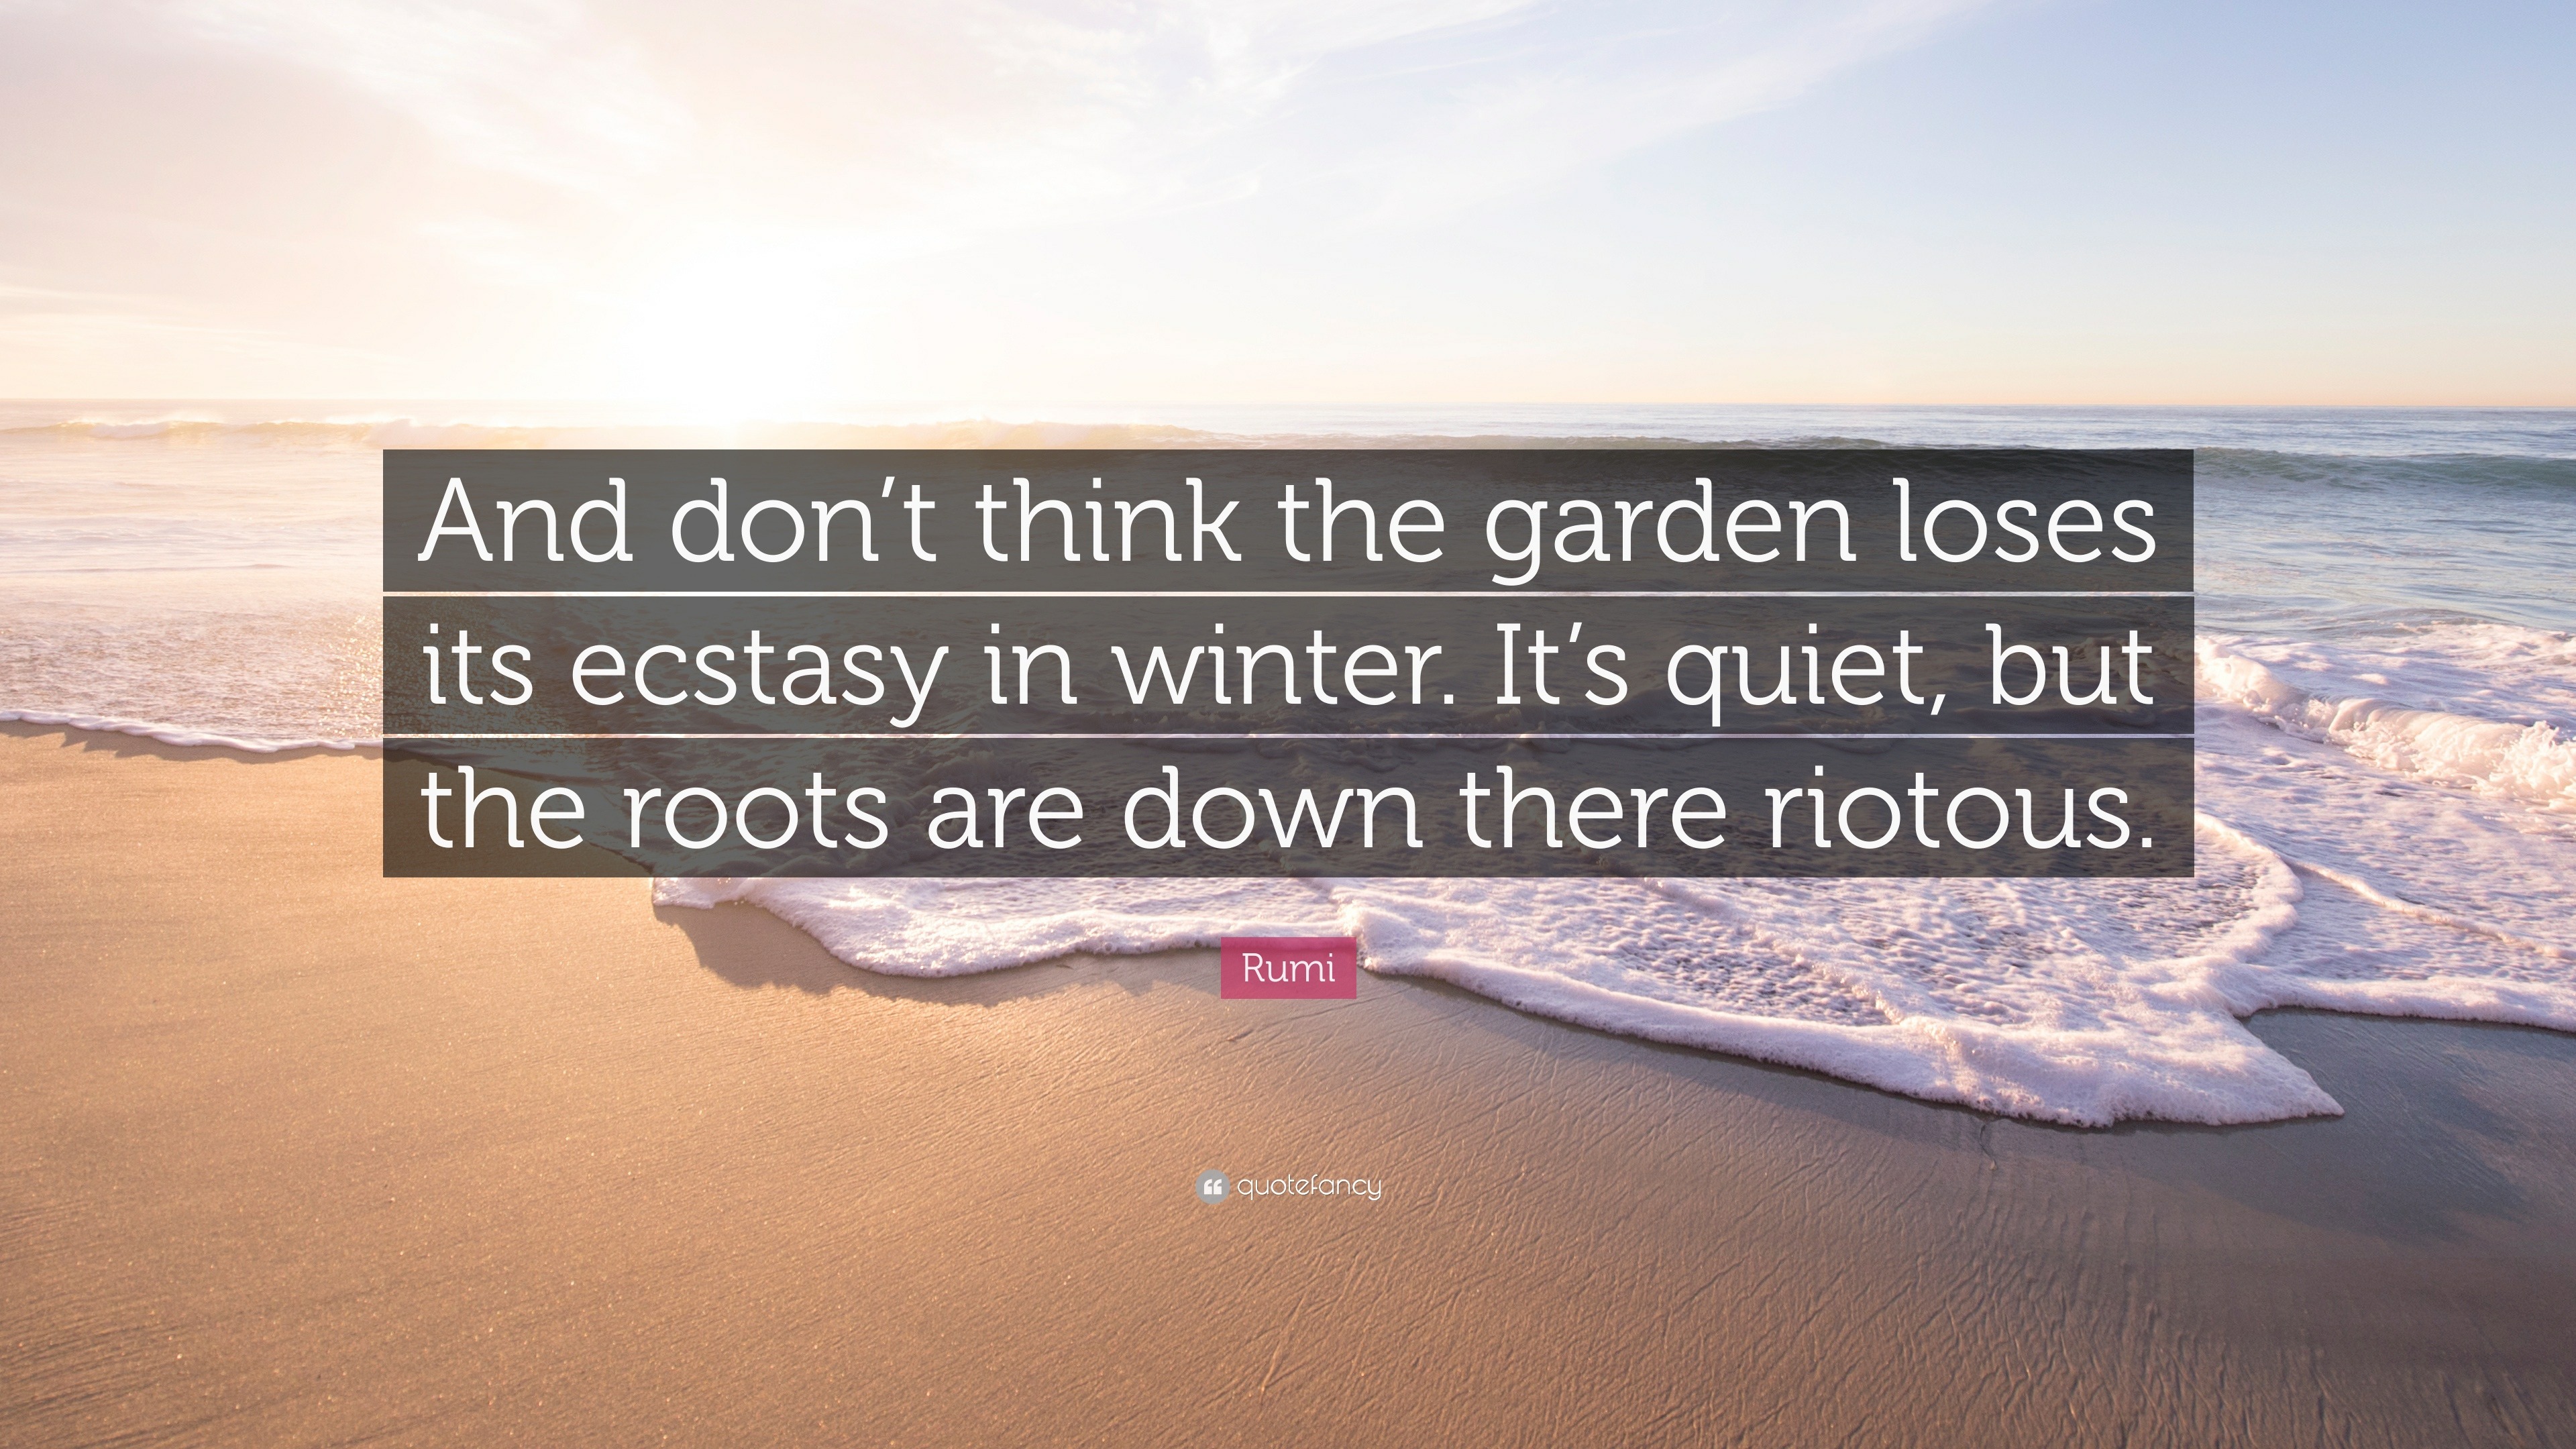 Rumi Quote “And don’t think the garden loses its ecstasy in winter. It